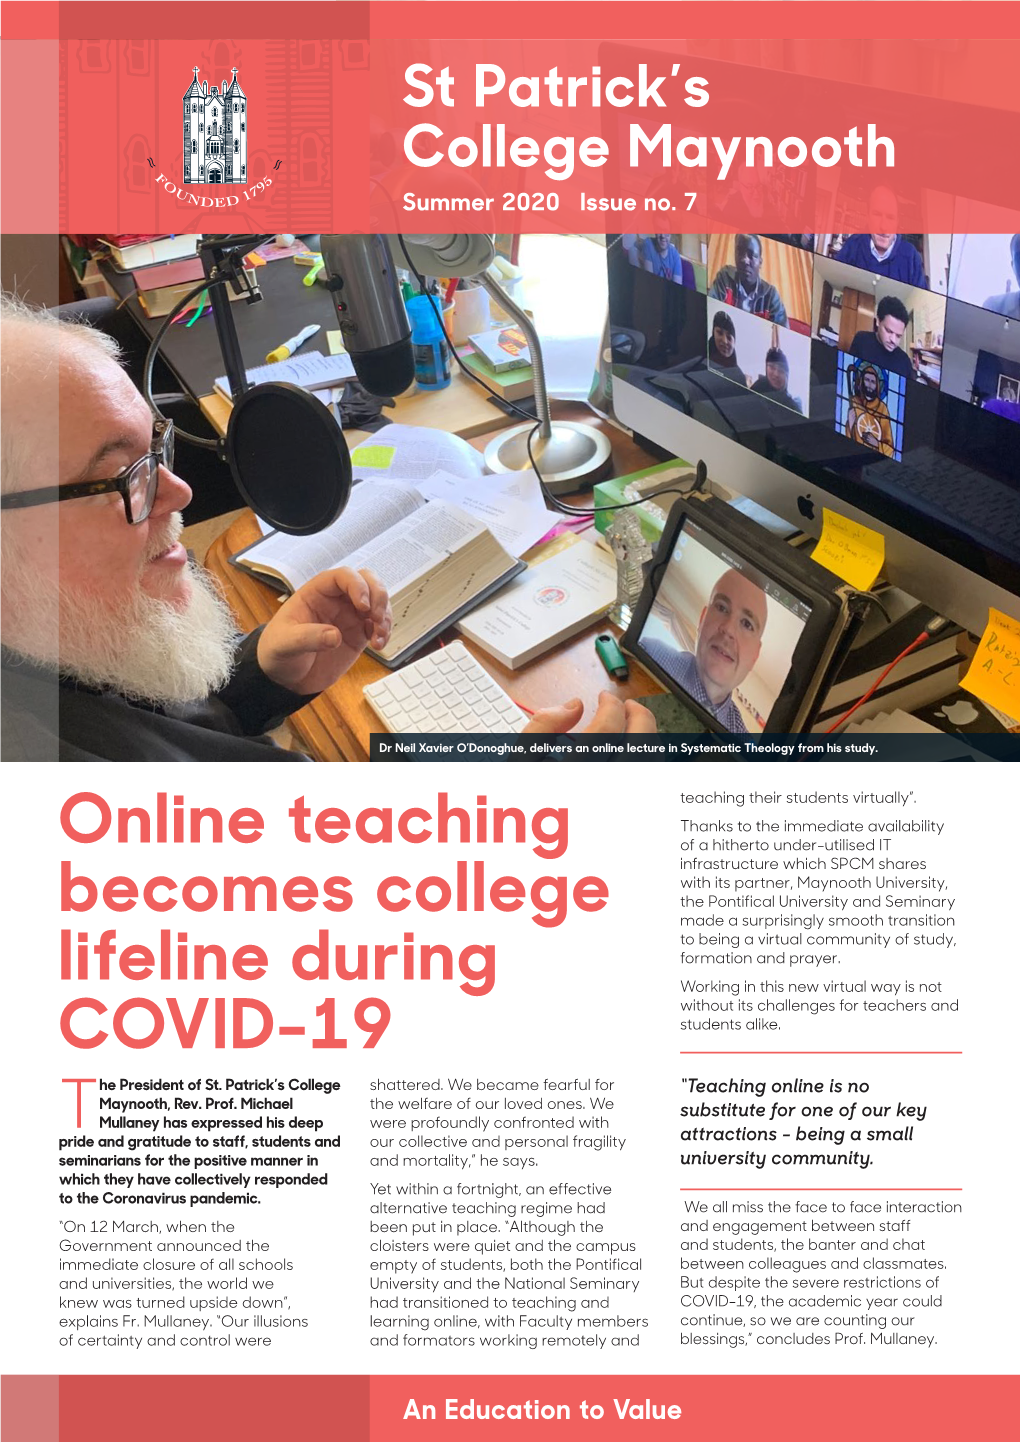 Online Teaching Becomes College Lifeline During COVID-19